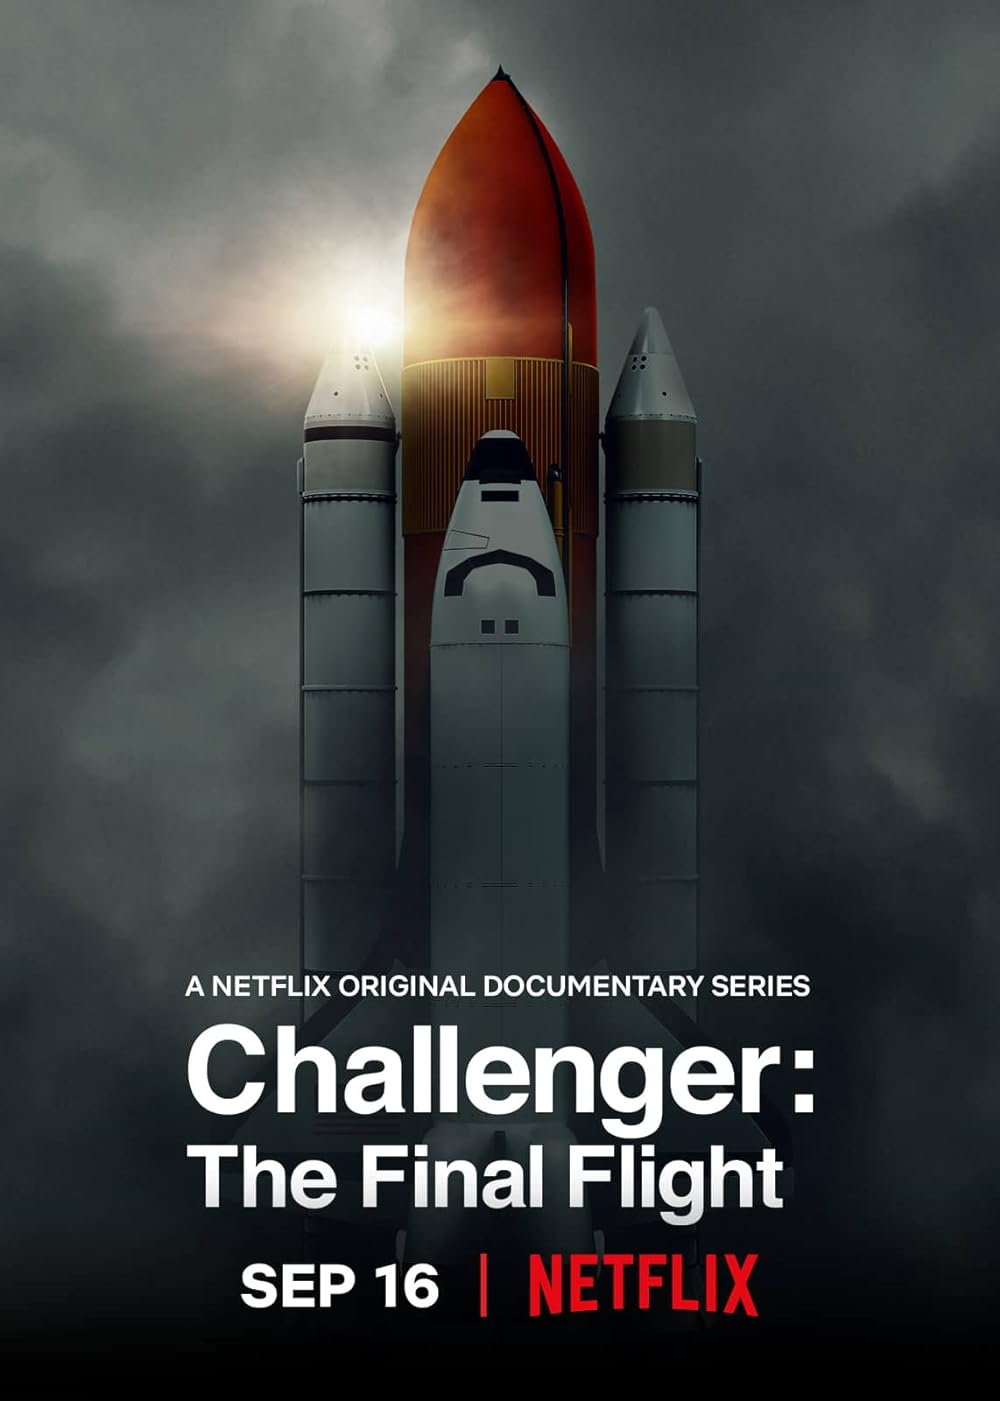 Challenger: The Final Flight (2020) S1 EP4 Nothing Ends Here 448Kbps 23.976Fps 48Khz 5.1Ch DD+ NF E-AC3 Turkish Audio TAC